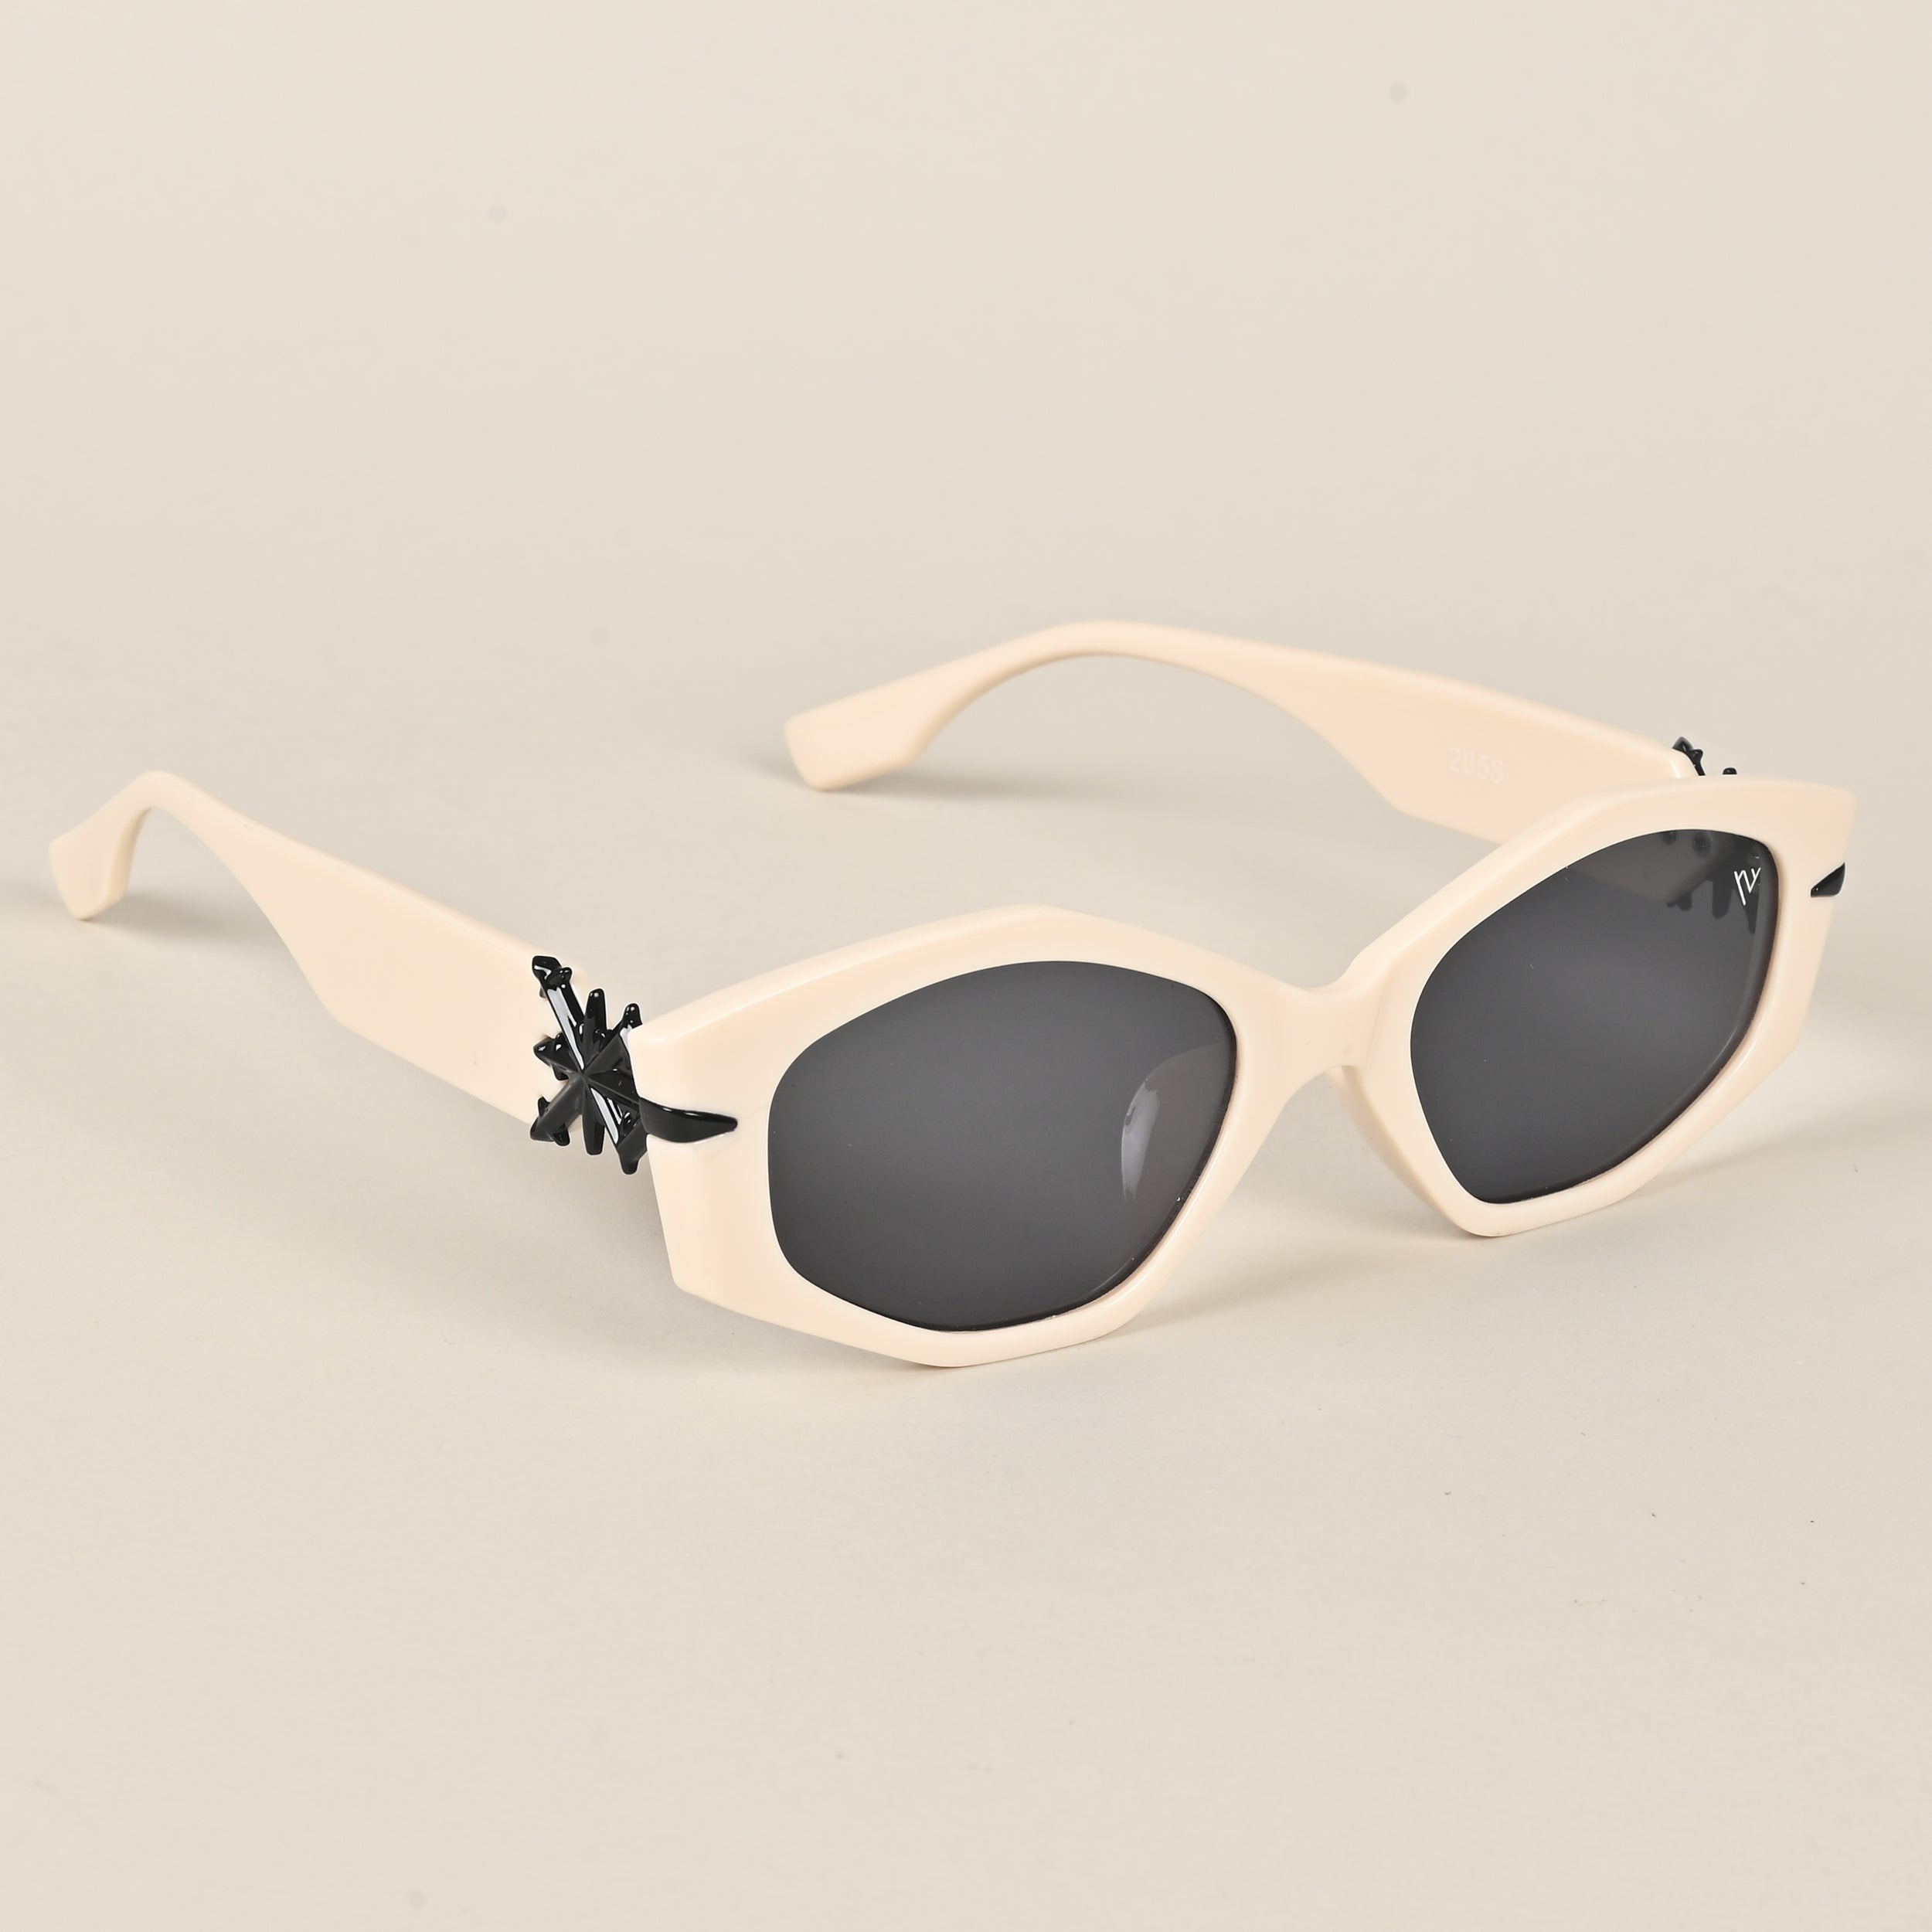 Voyage Black Oval Sunglasses for Women - MG3988